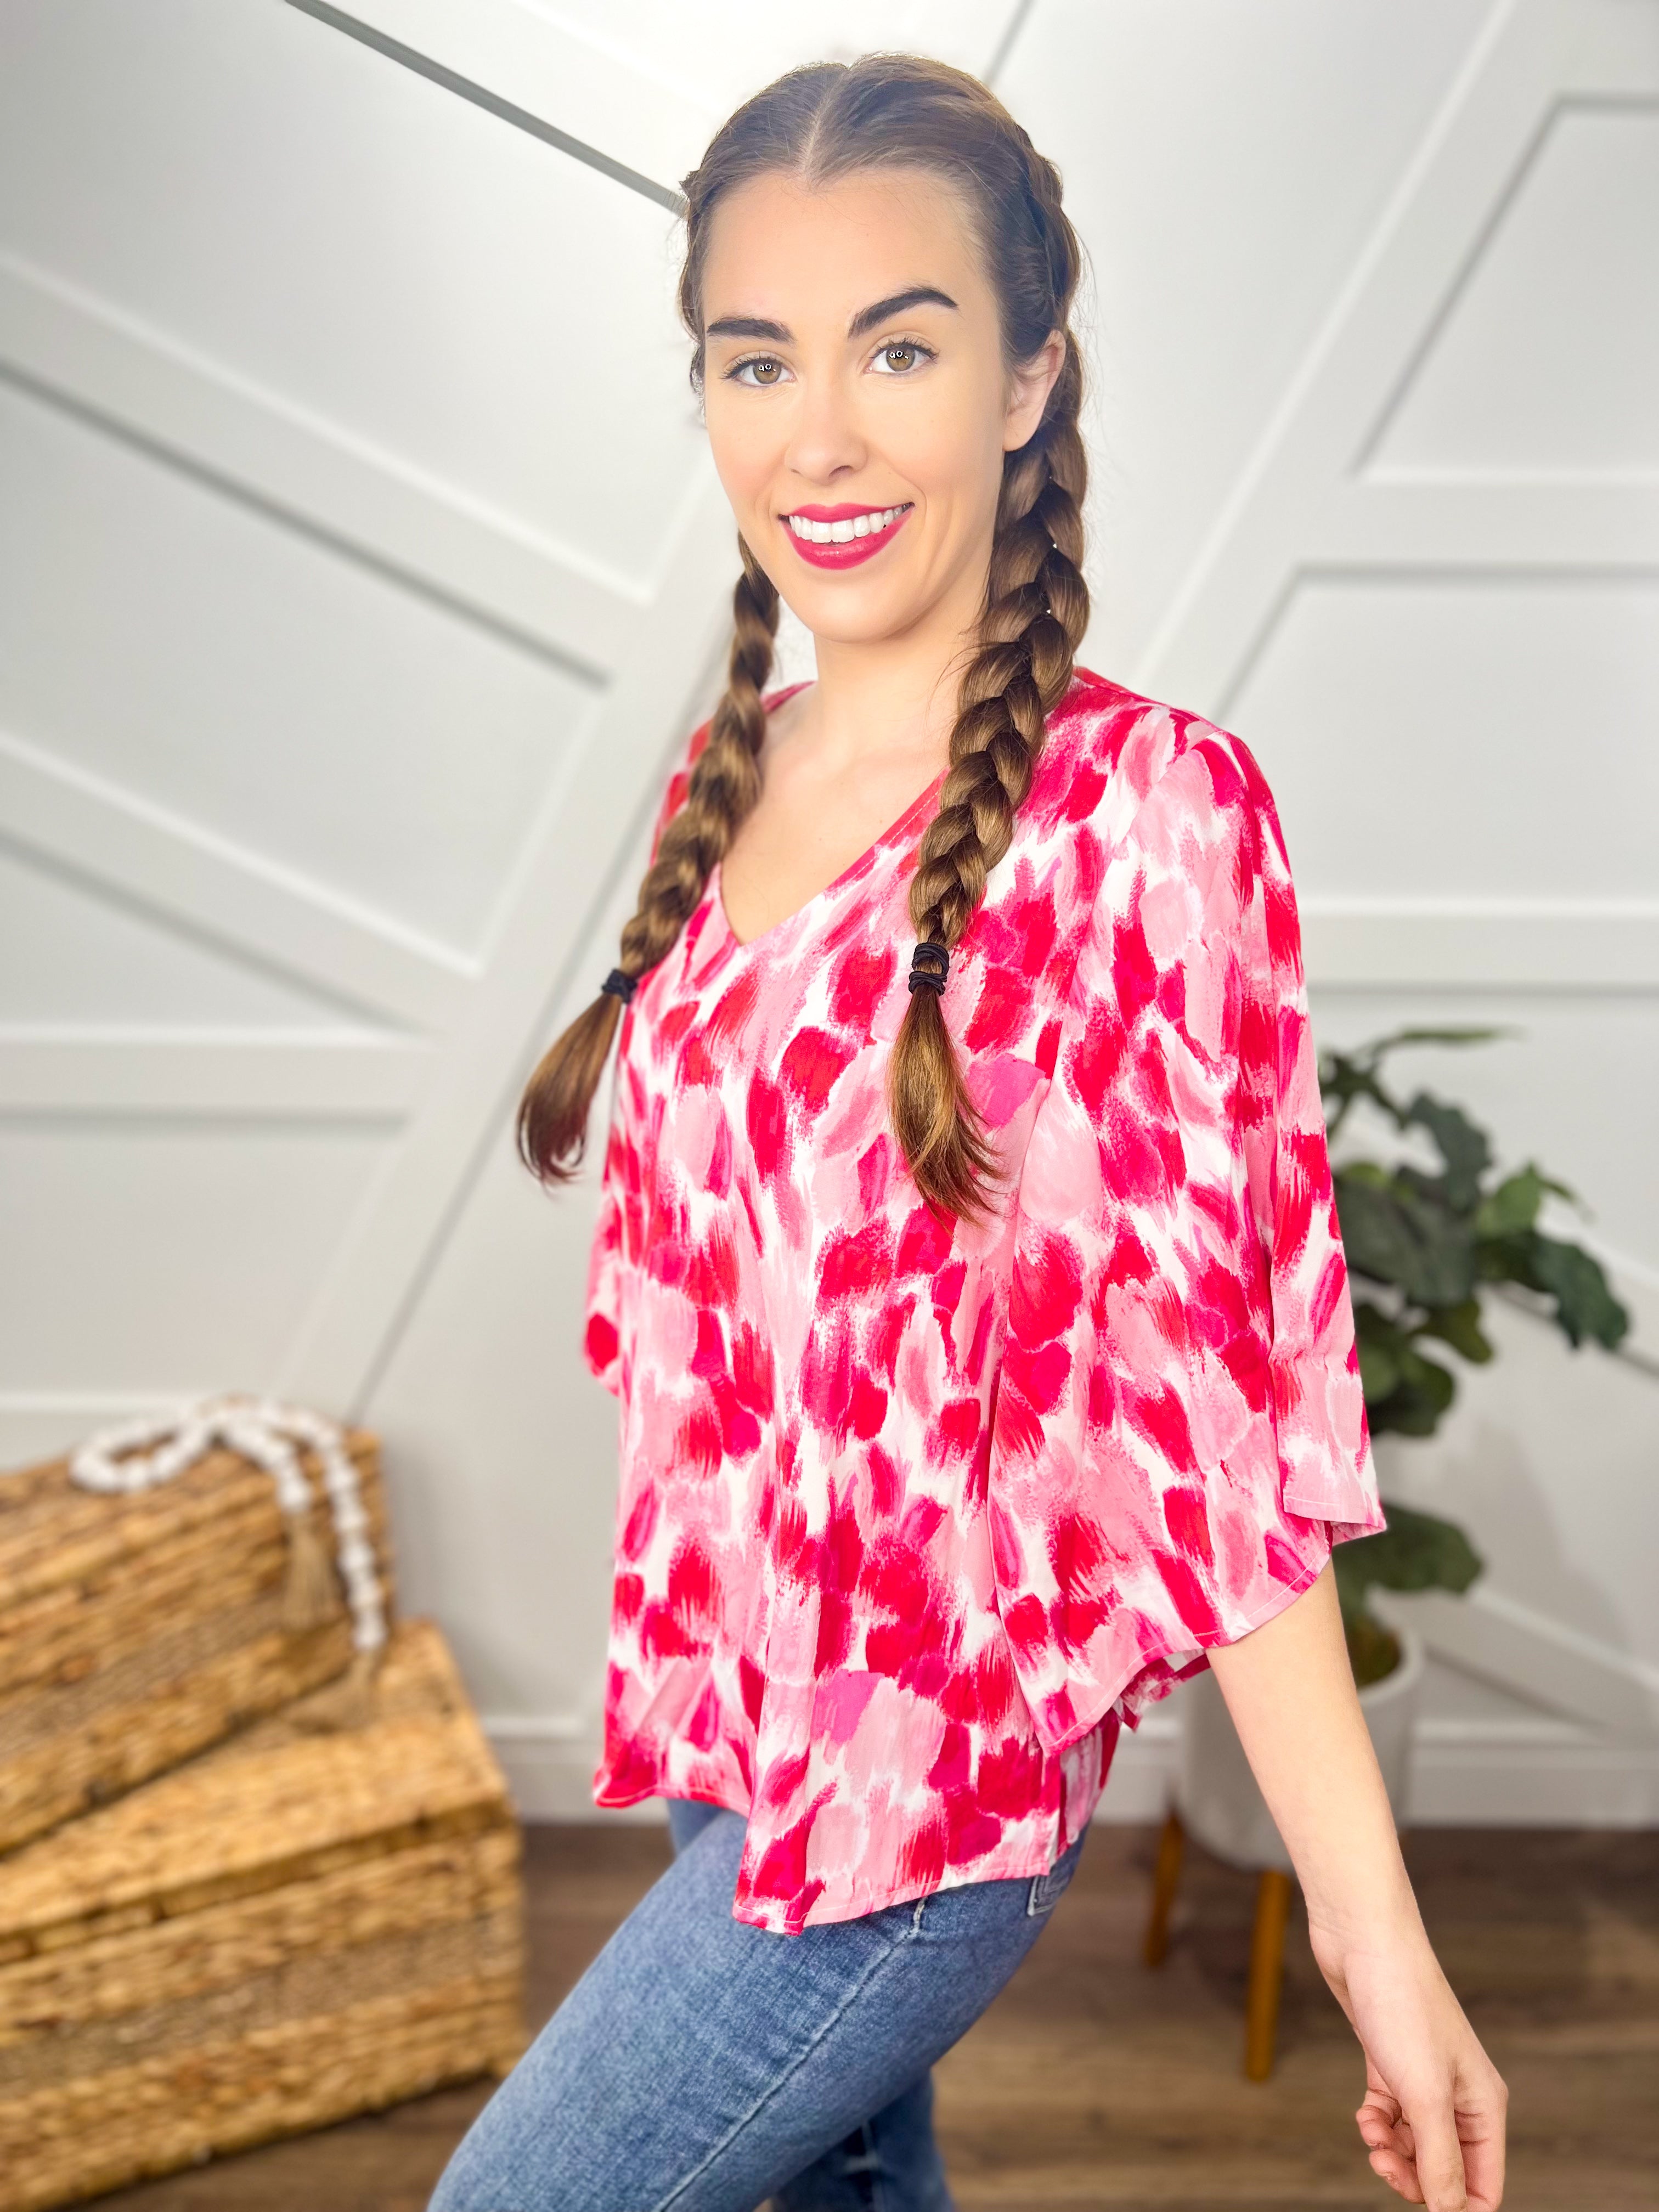 Romance in the Air Top-120 Long Sleeve Tops-Andree by Unit-Heathered Boho Boutique, Women's Fashion and Accessories in Palmetto, FL